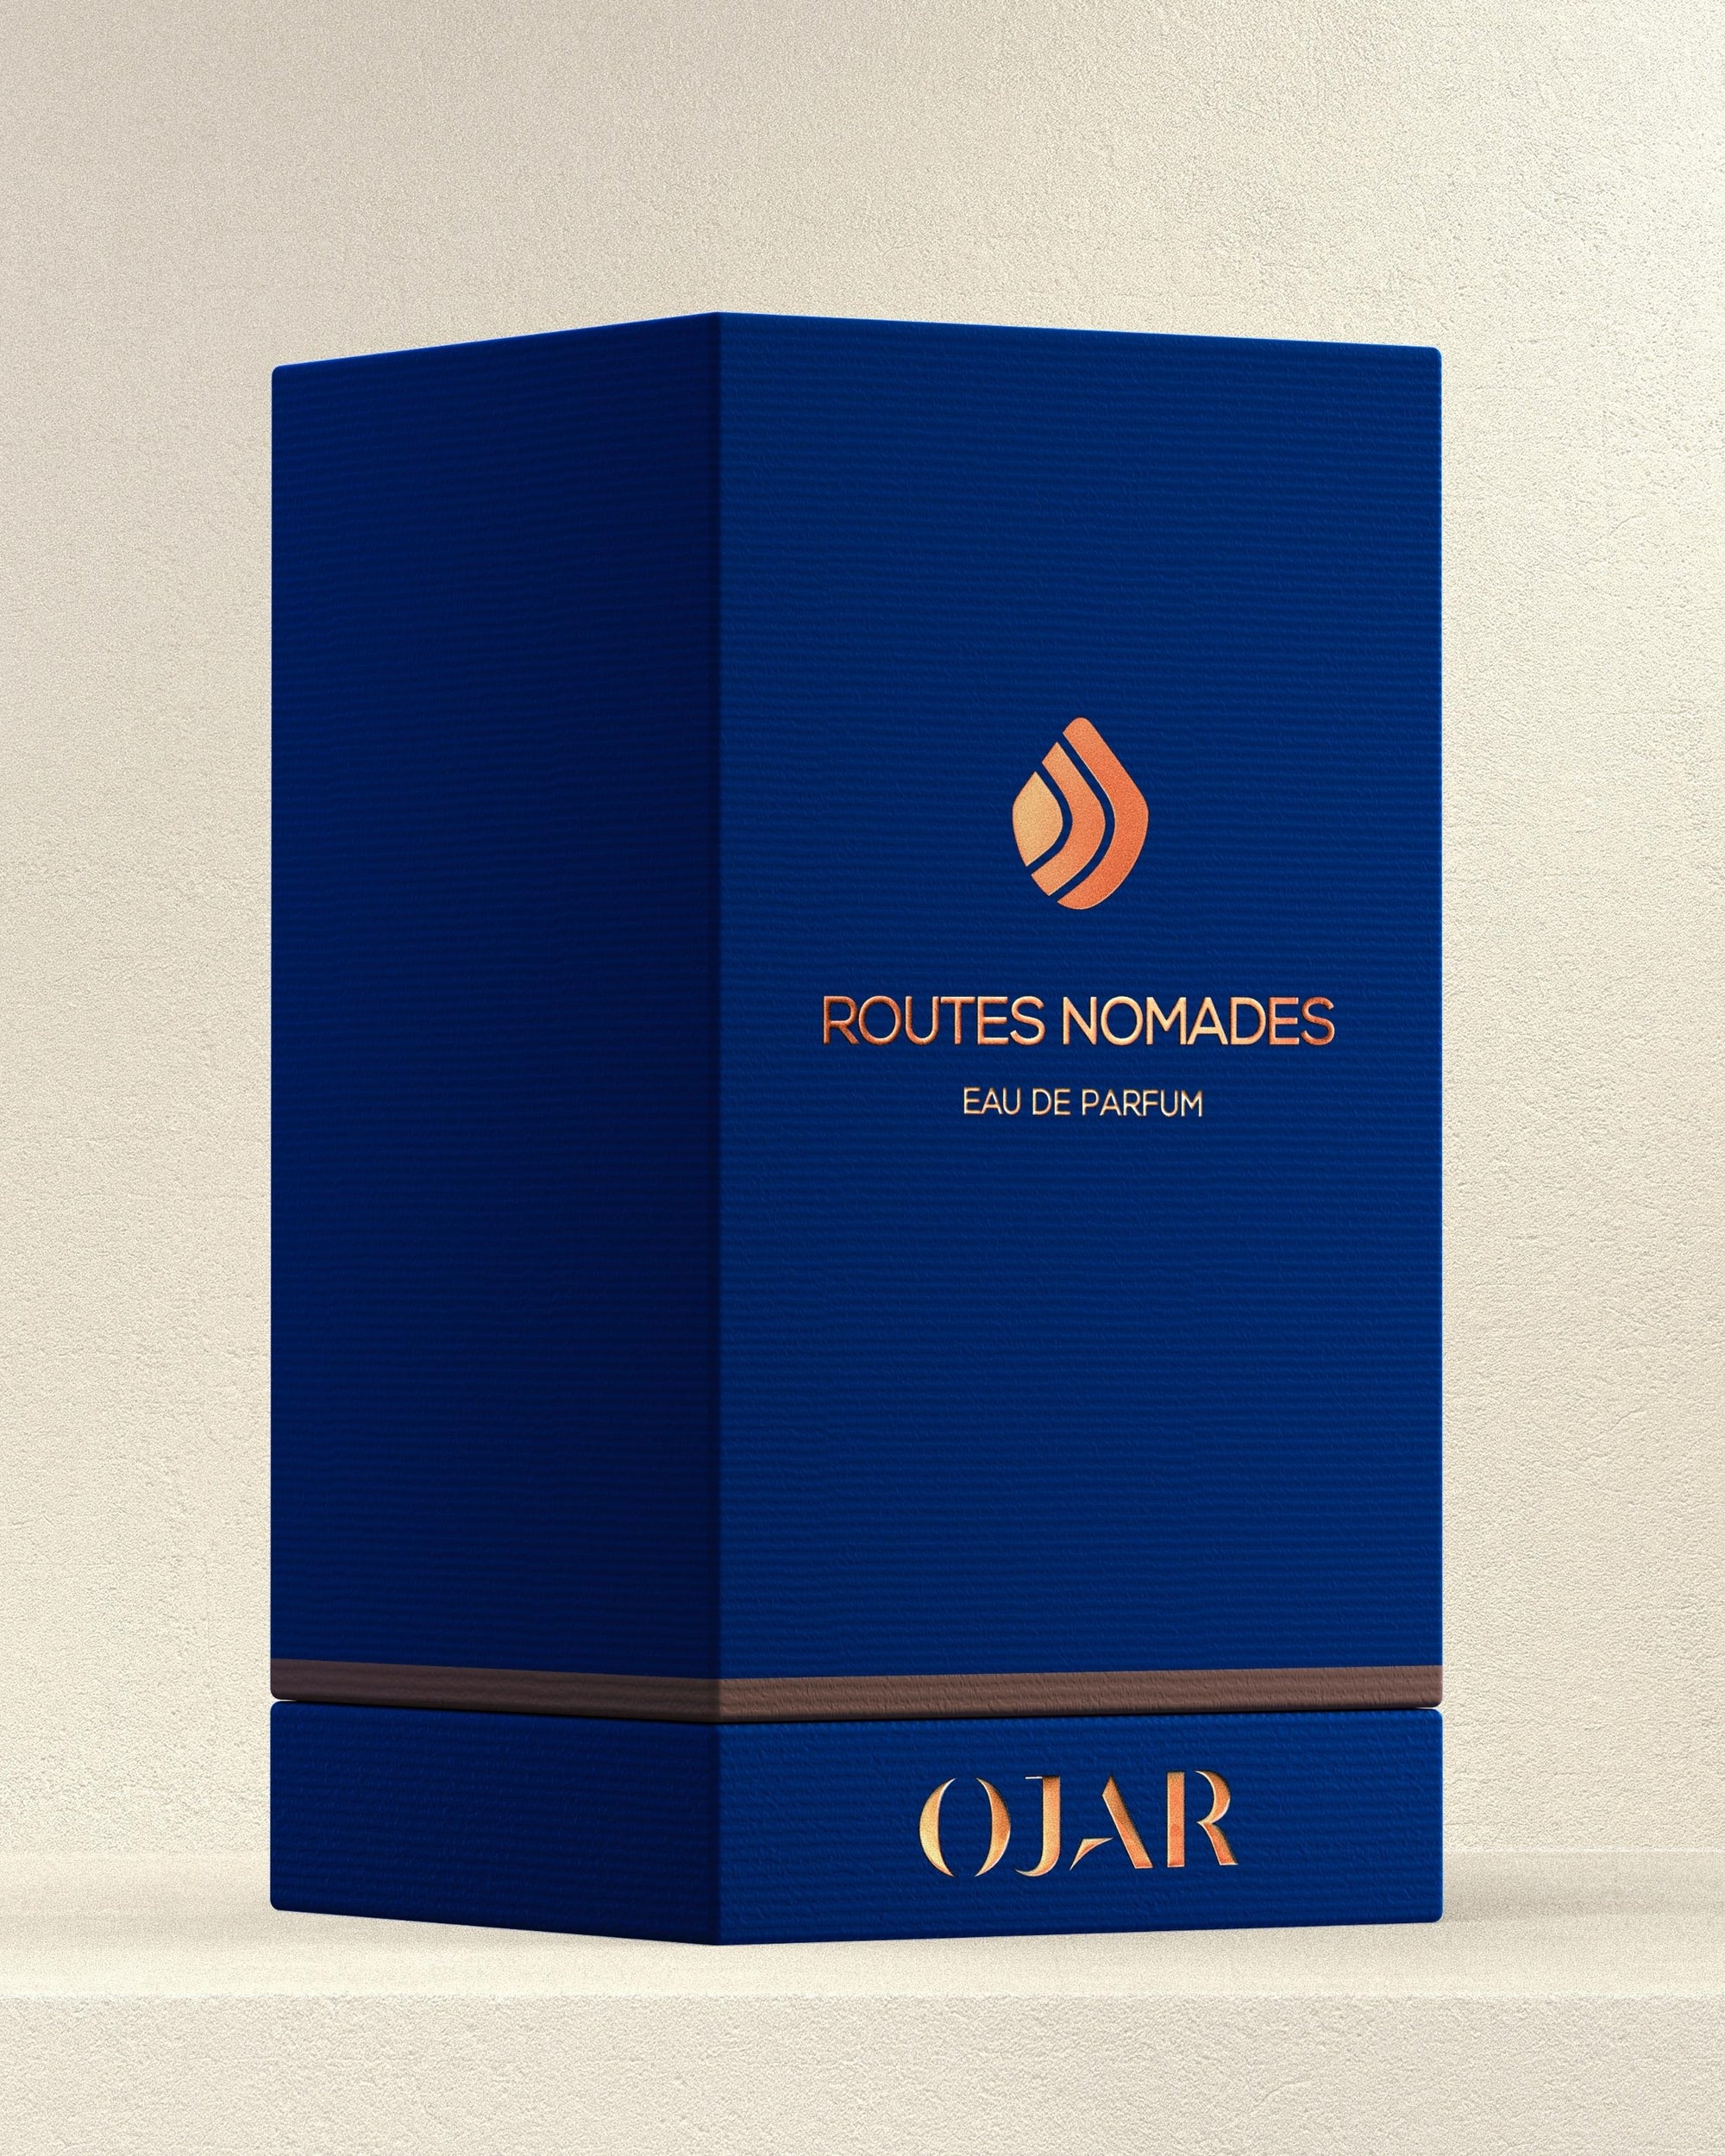 OJAR - ROUTES NOMADES